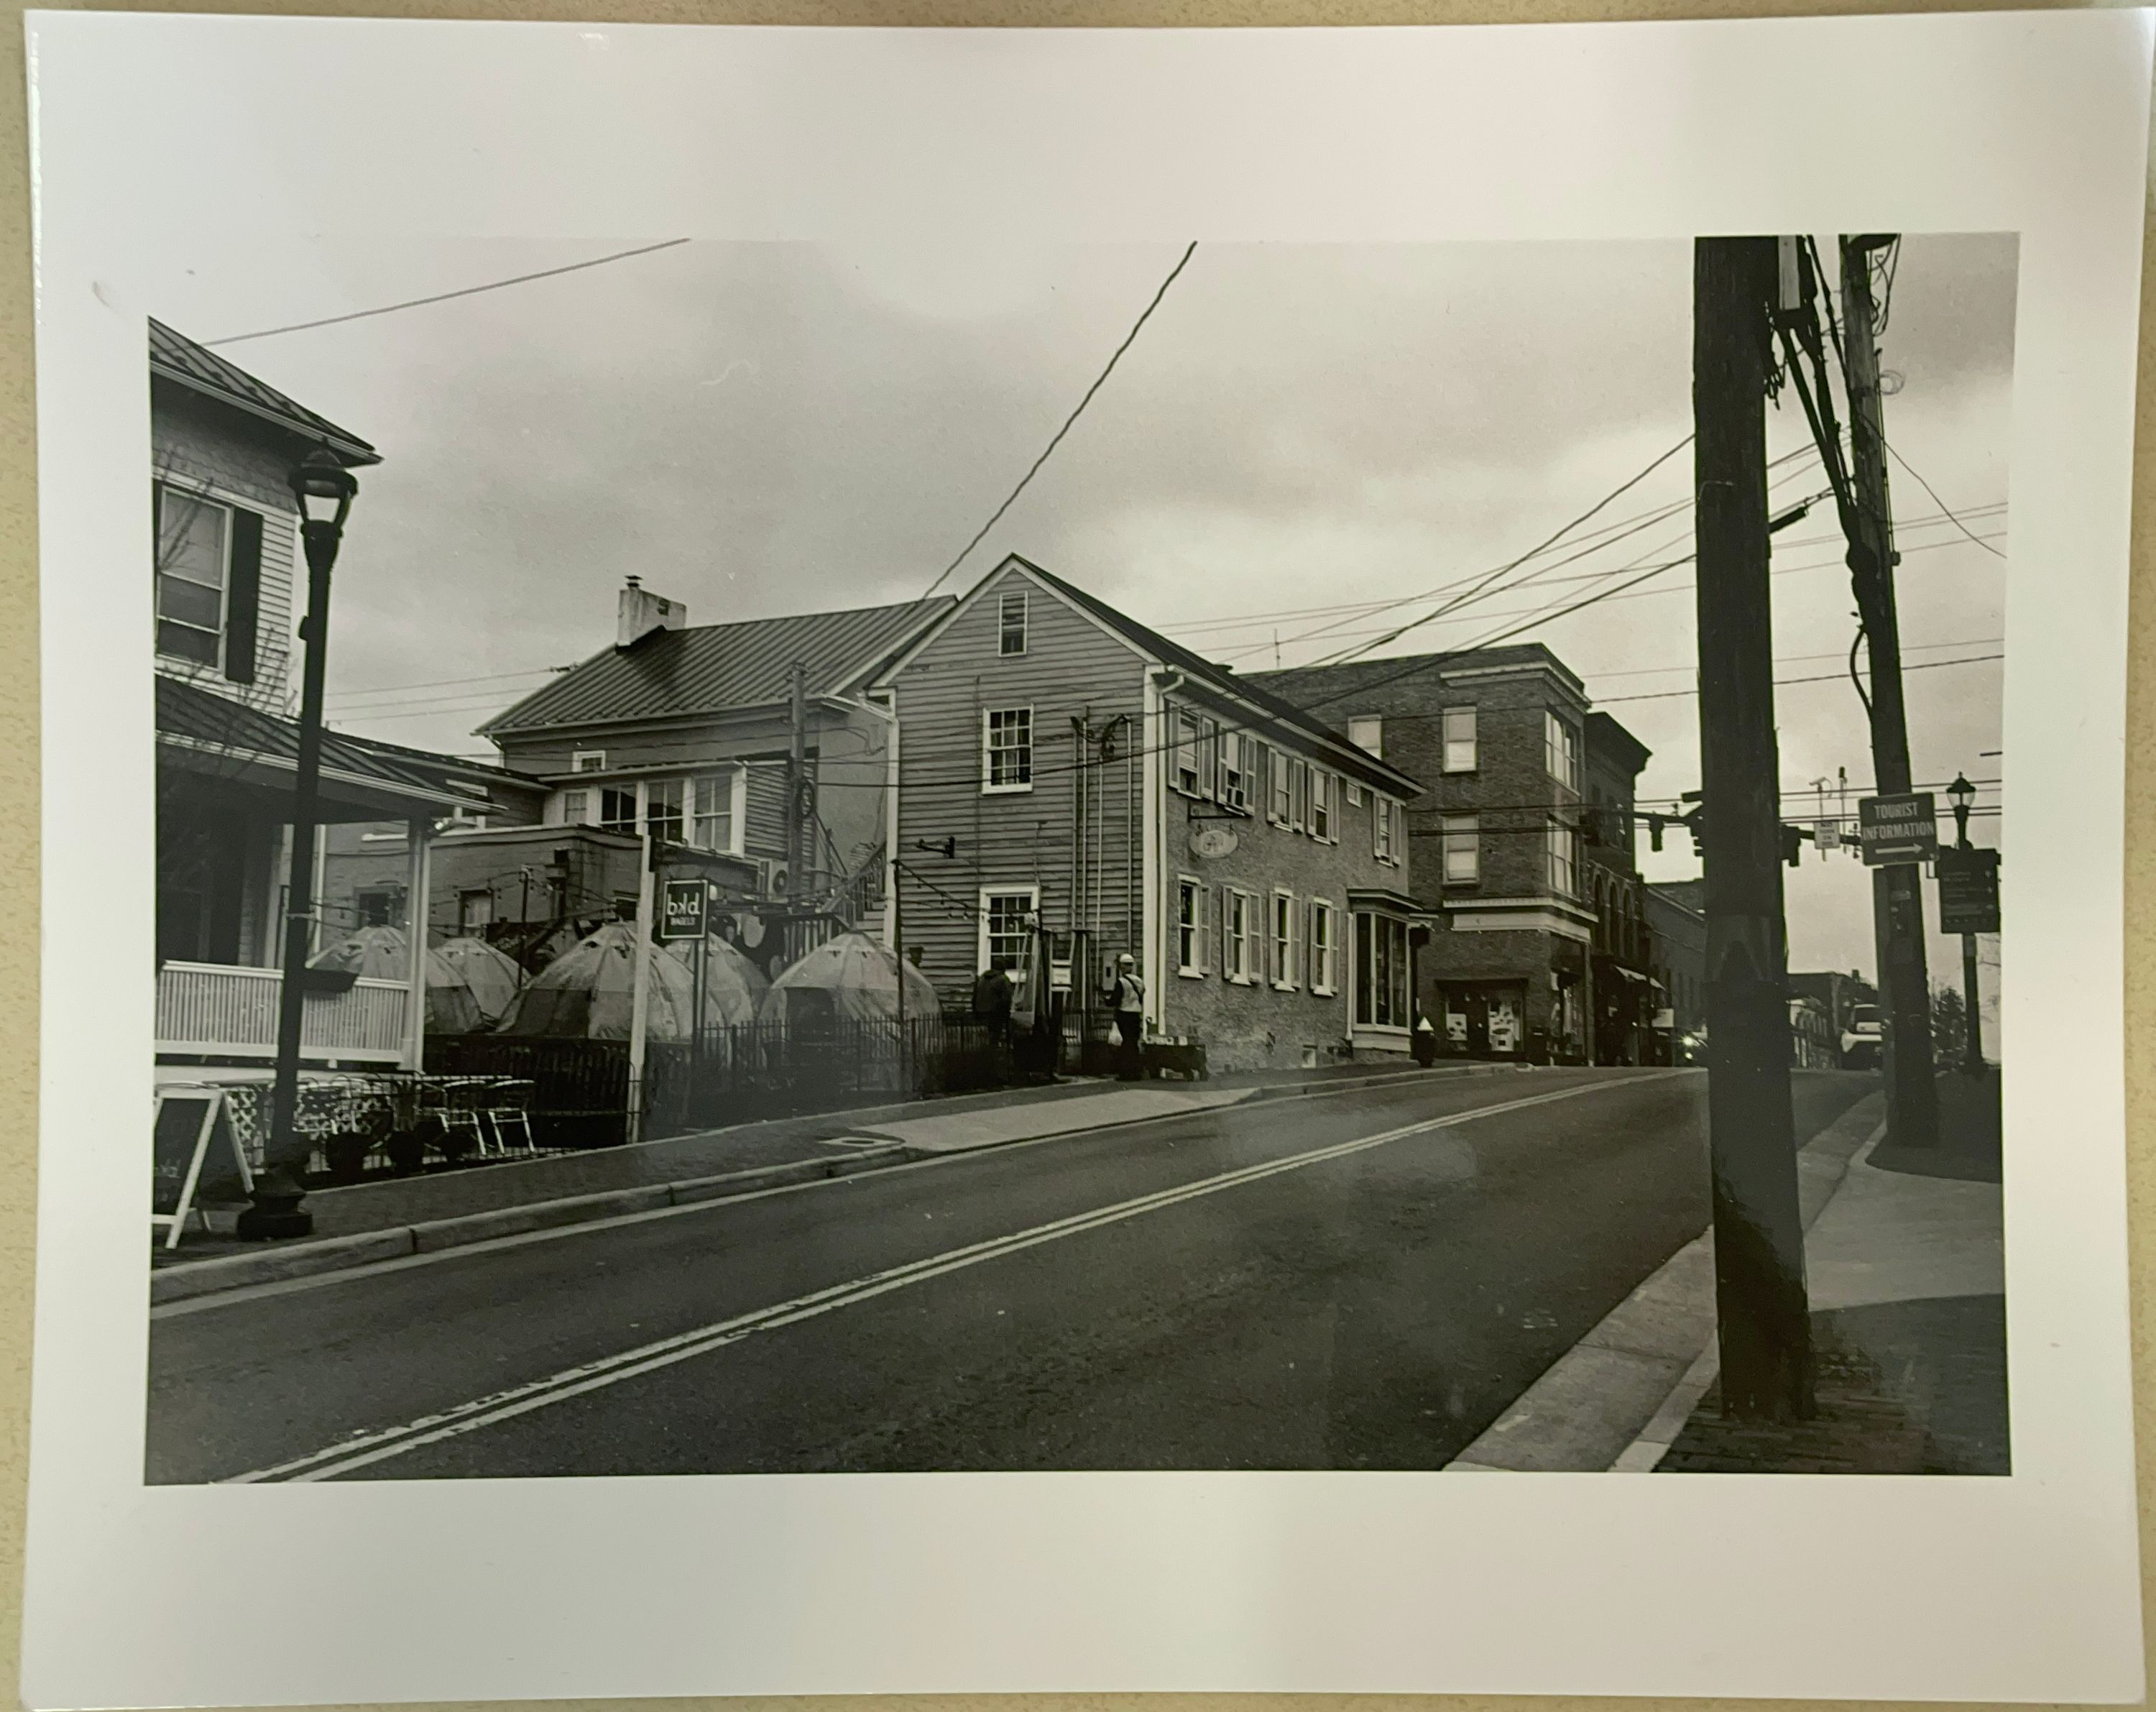 A glossy paper print of a black and white image of Delirium Café and other old buildings on King Street in Leesburg, Virgina